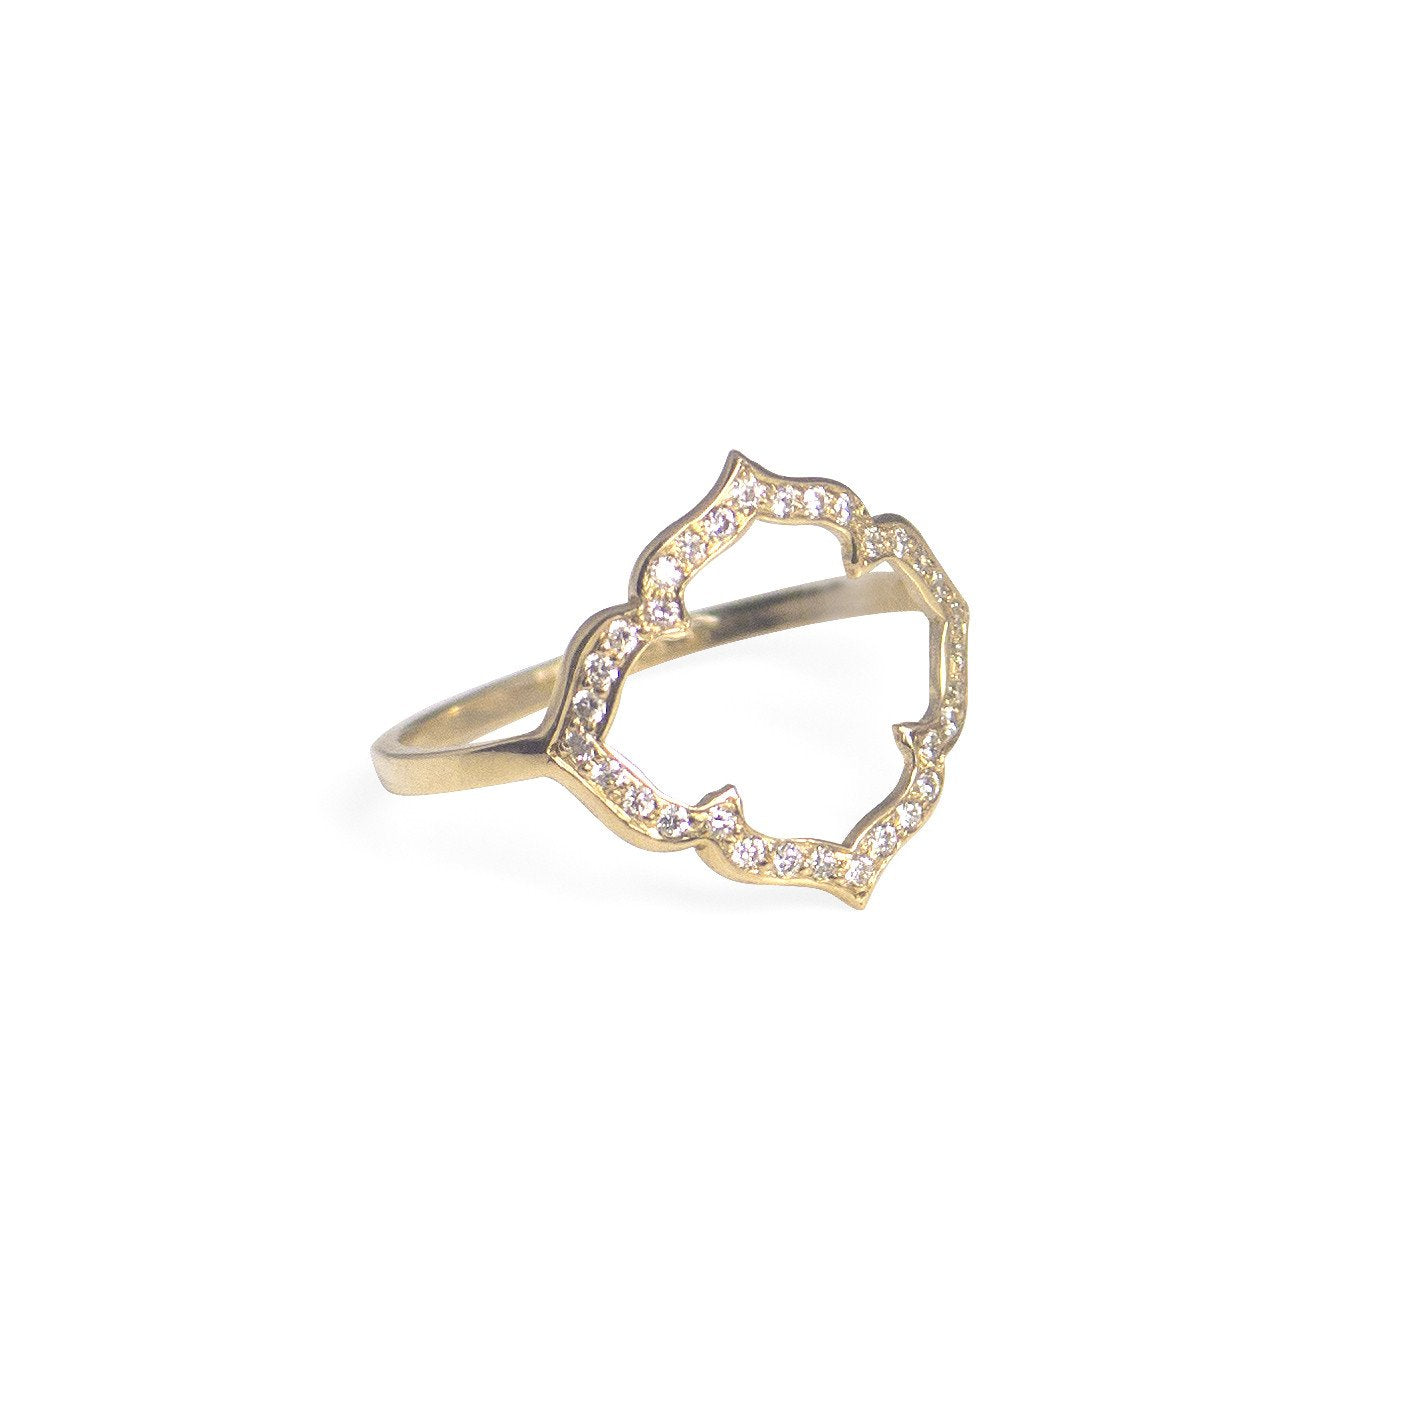 14k yellow gold with brown pave diamonds / 5 clover ring